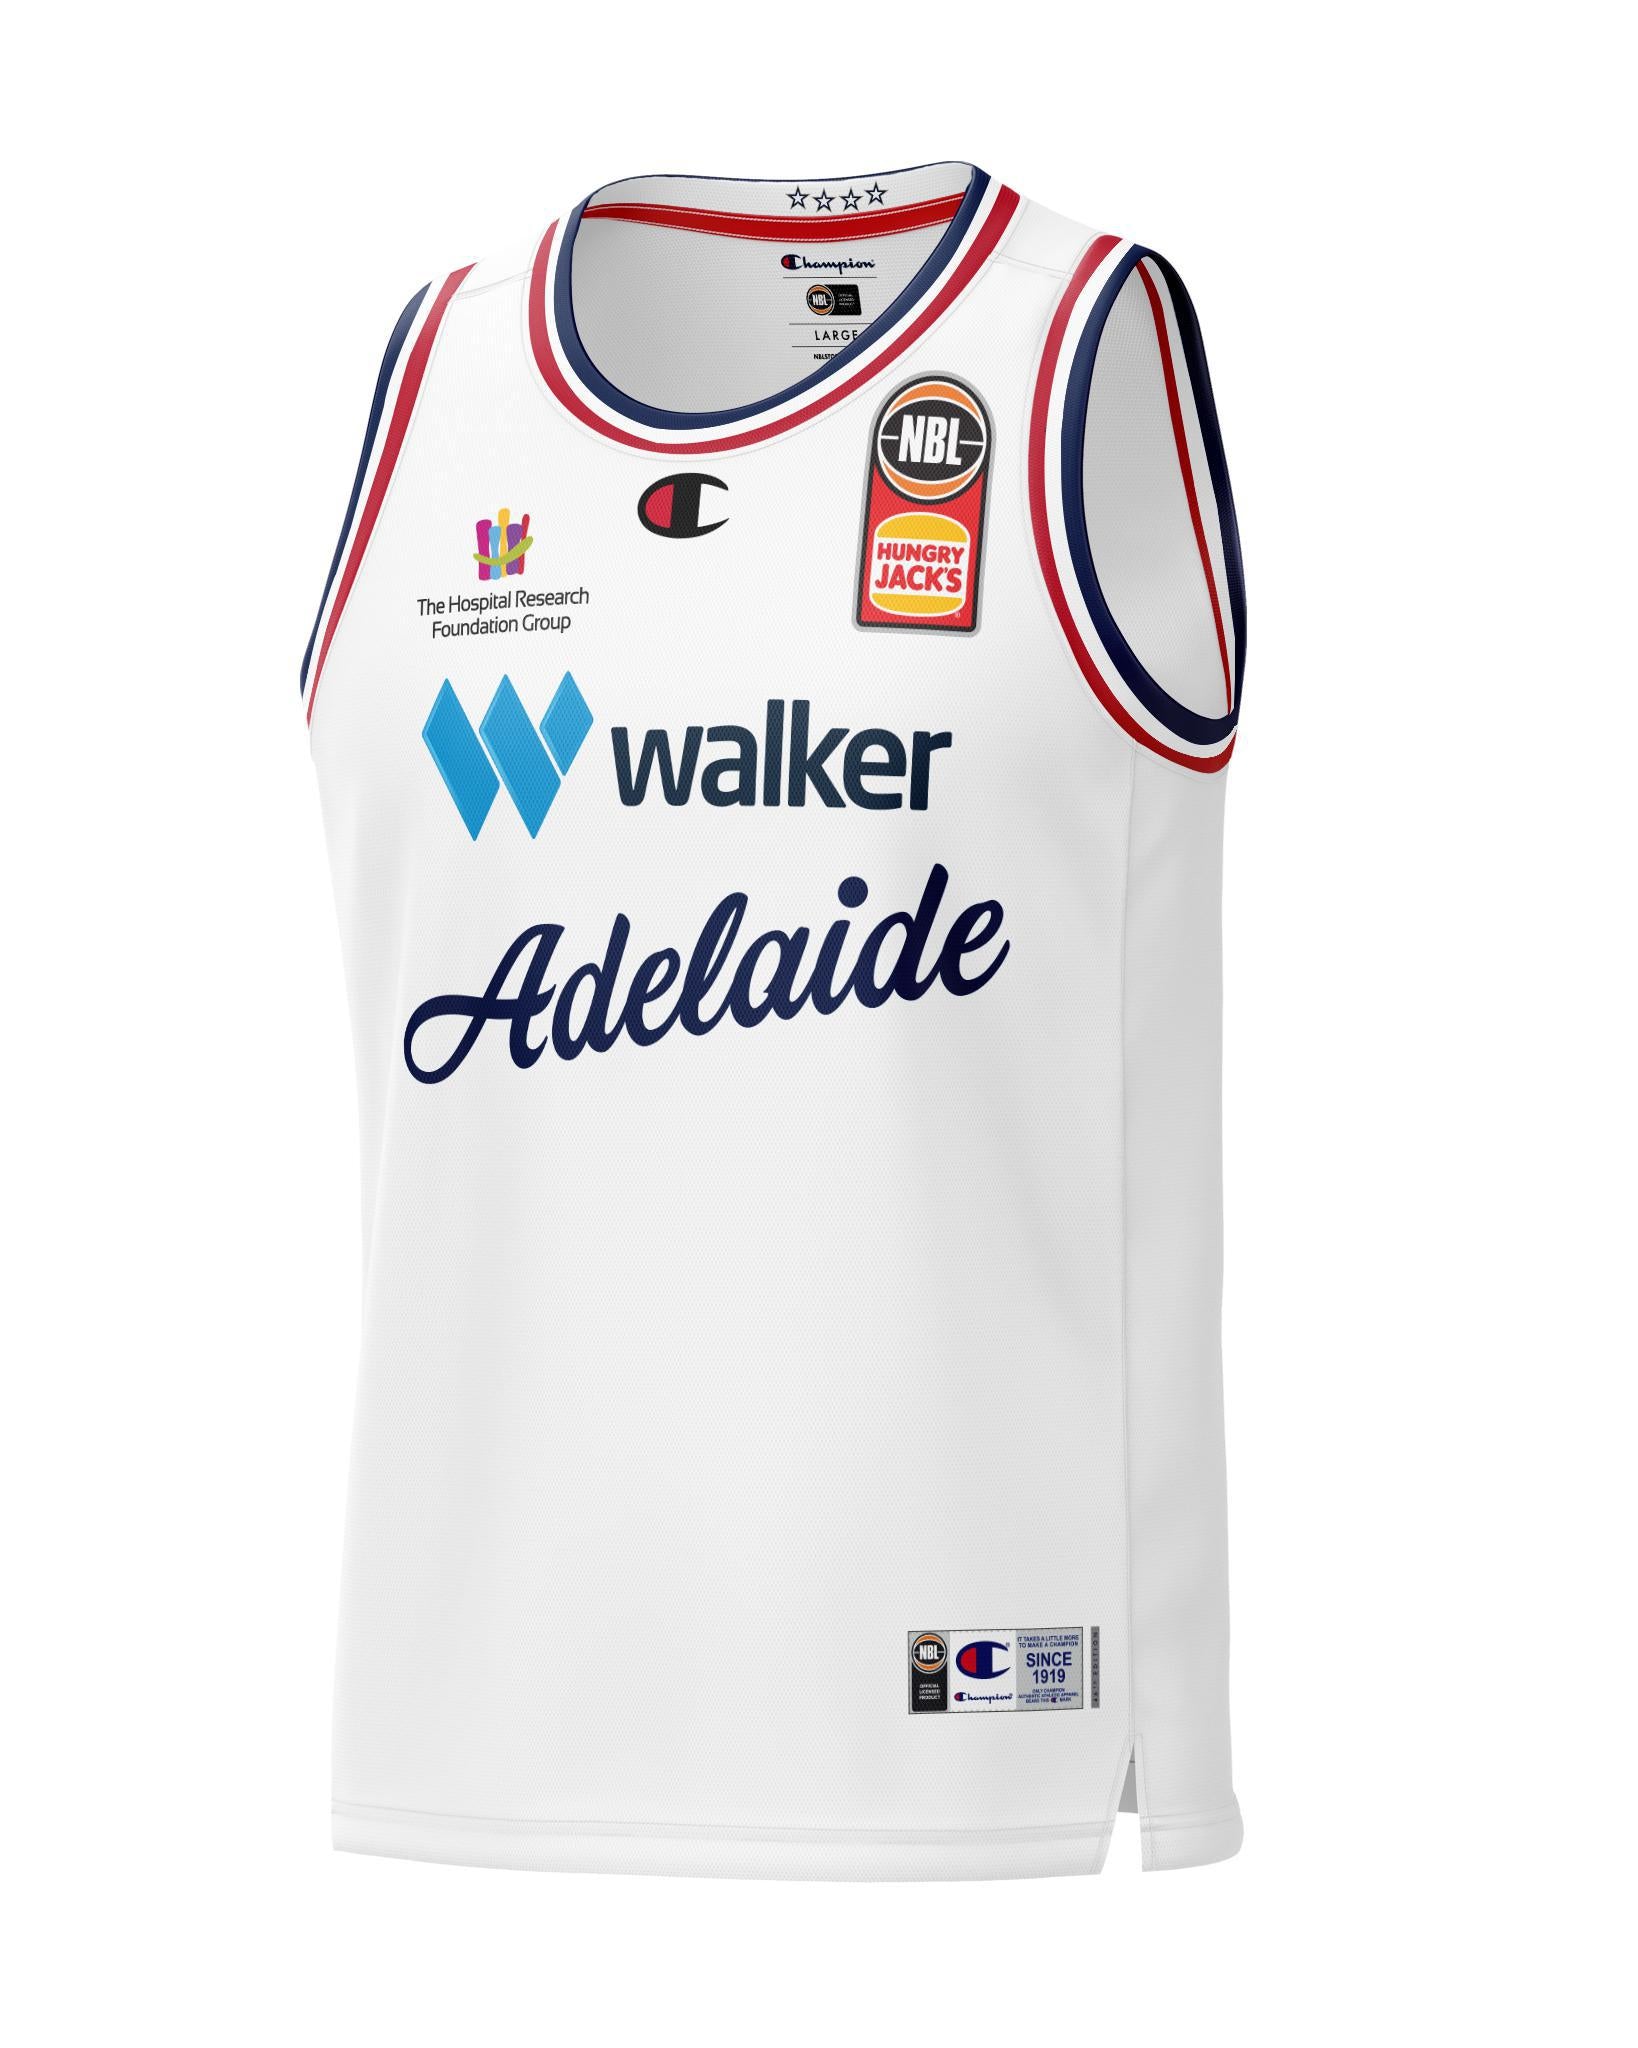 Adelaide 36ers 2020-2021 Away Jersey